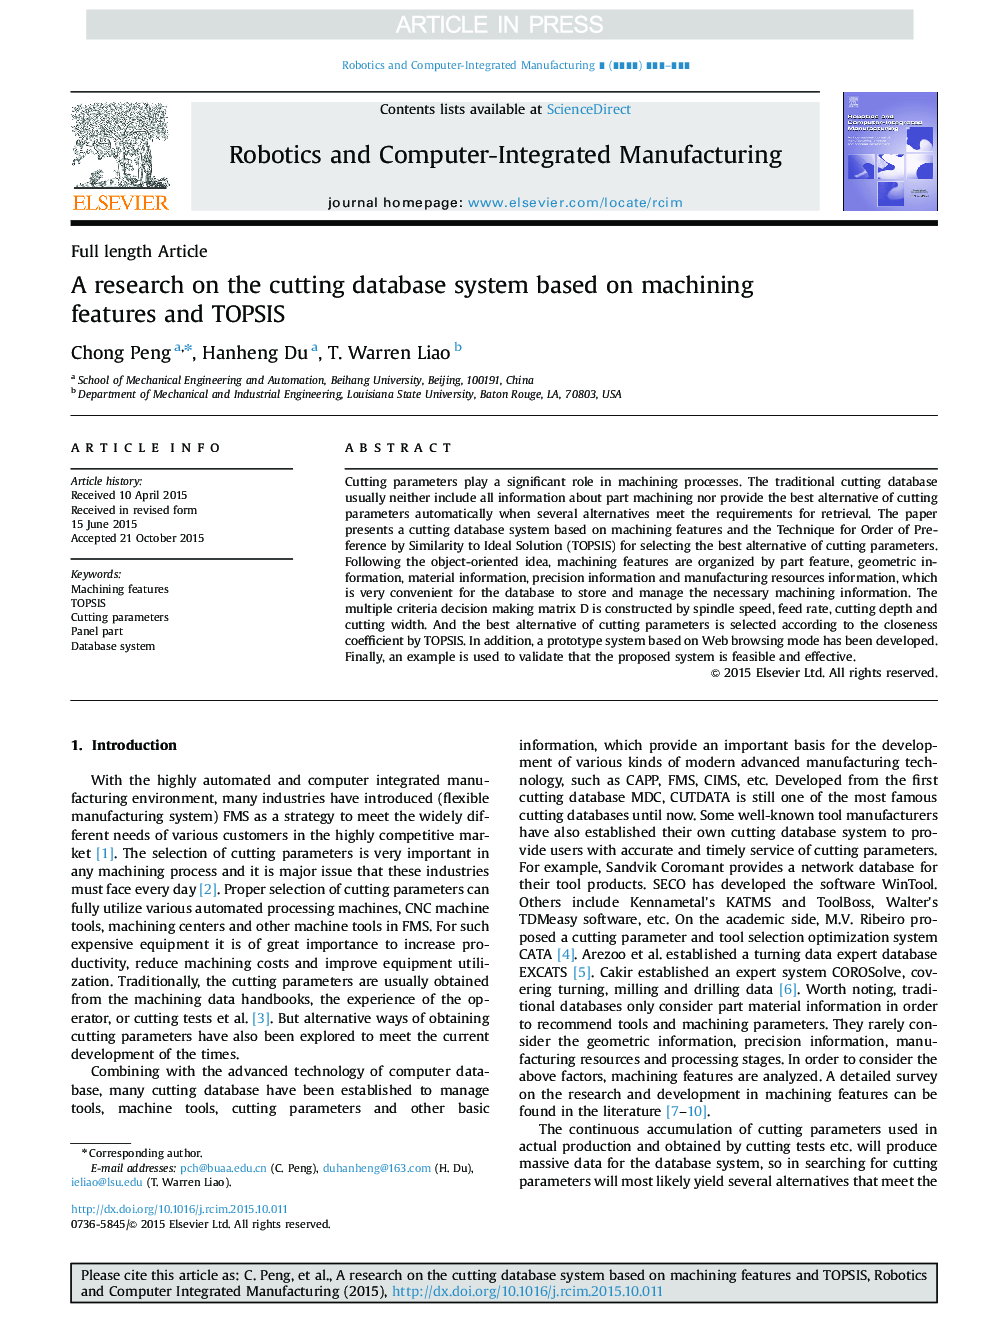 A research on the cutting database system based on machining features and TOPSIS